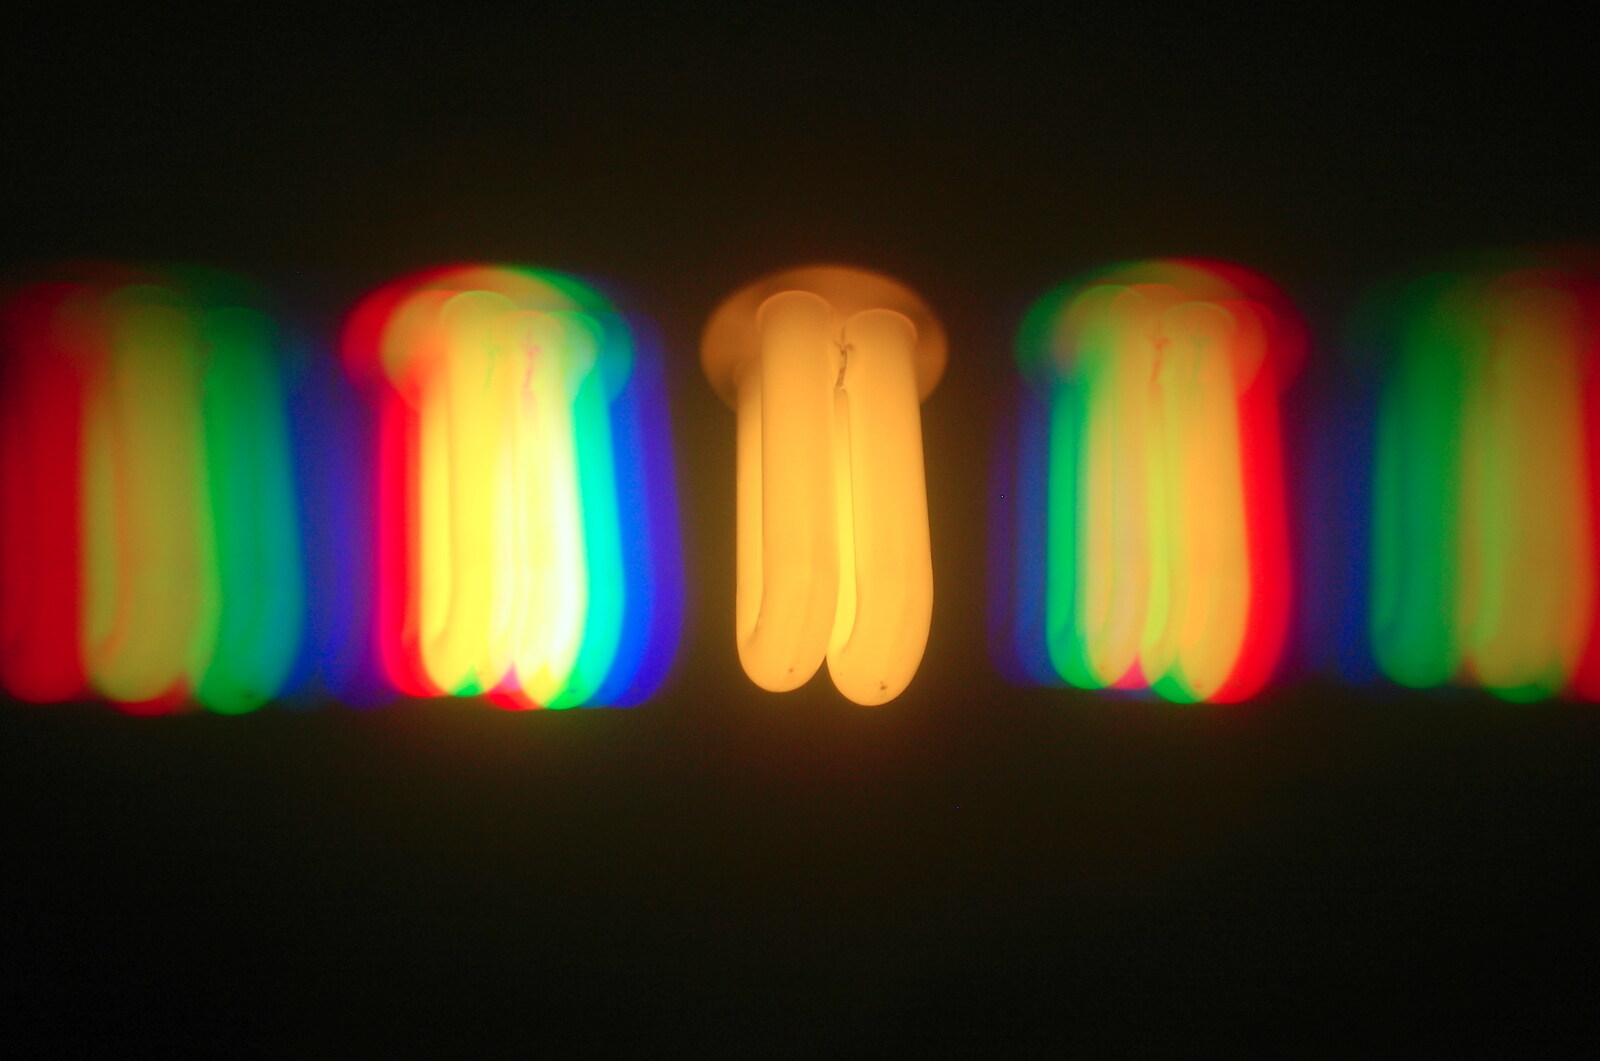 A CFL bulb through a diffraction grating from BSCC Bike Rides and Fun With Diffraction Gratings, Gissing and Diss - 26th May 2005